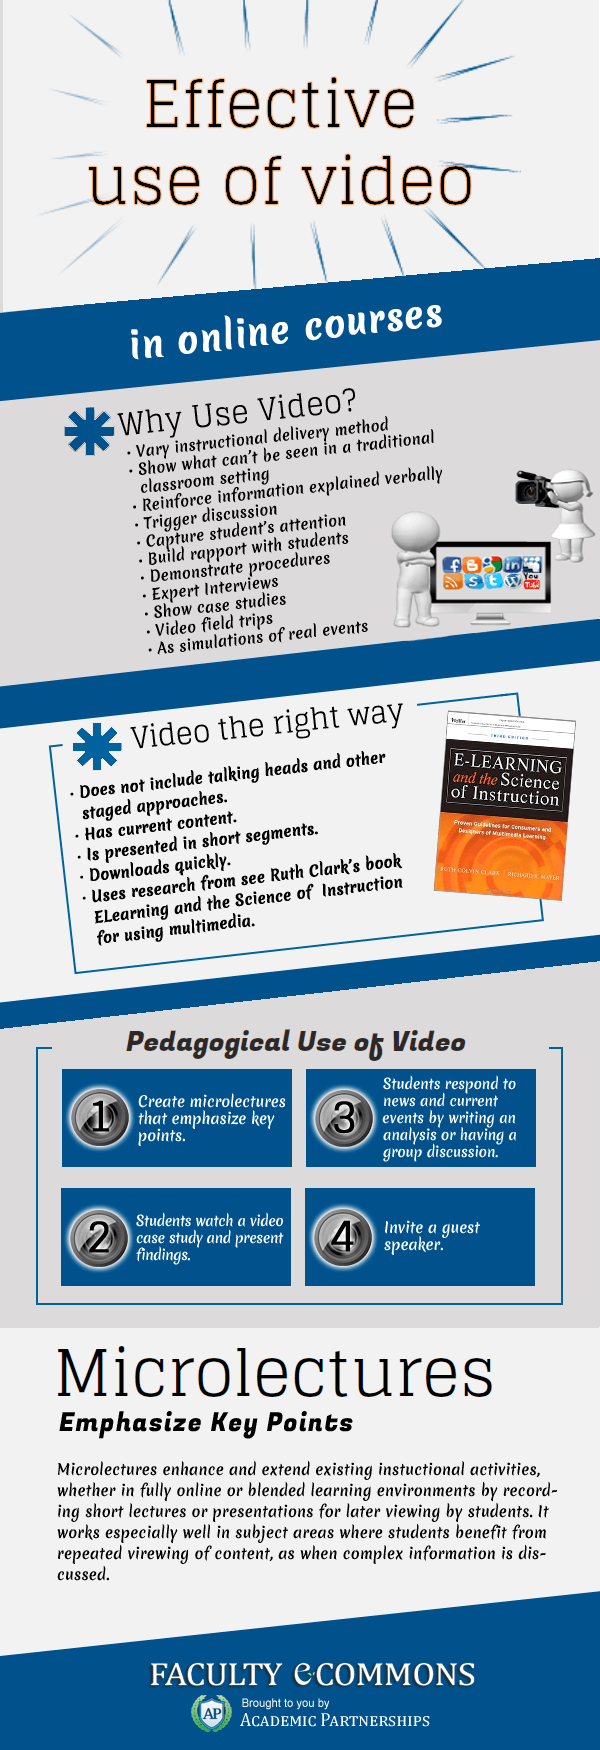 The Effective Use of Video in Online Courses Infographic